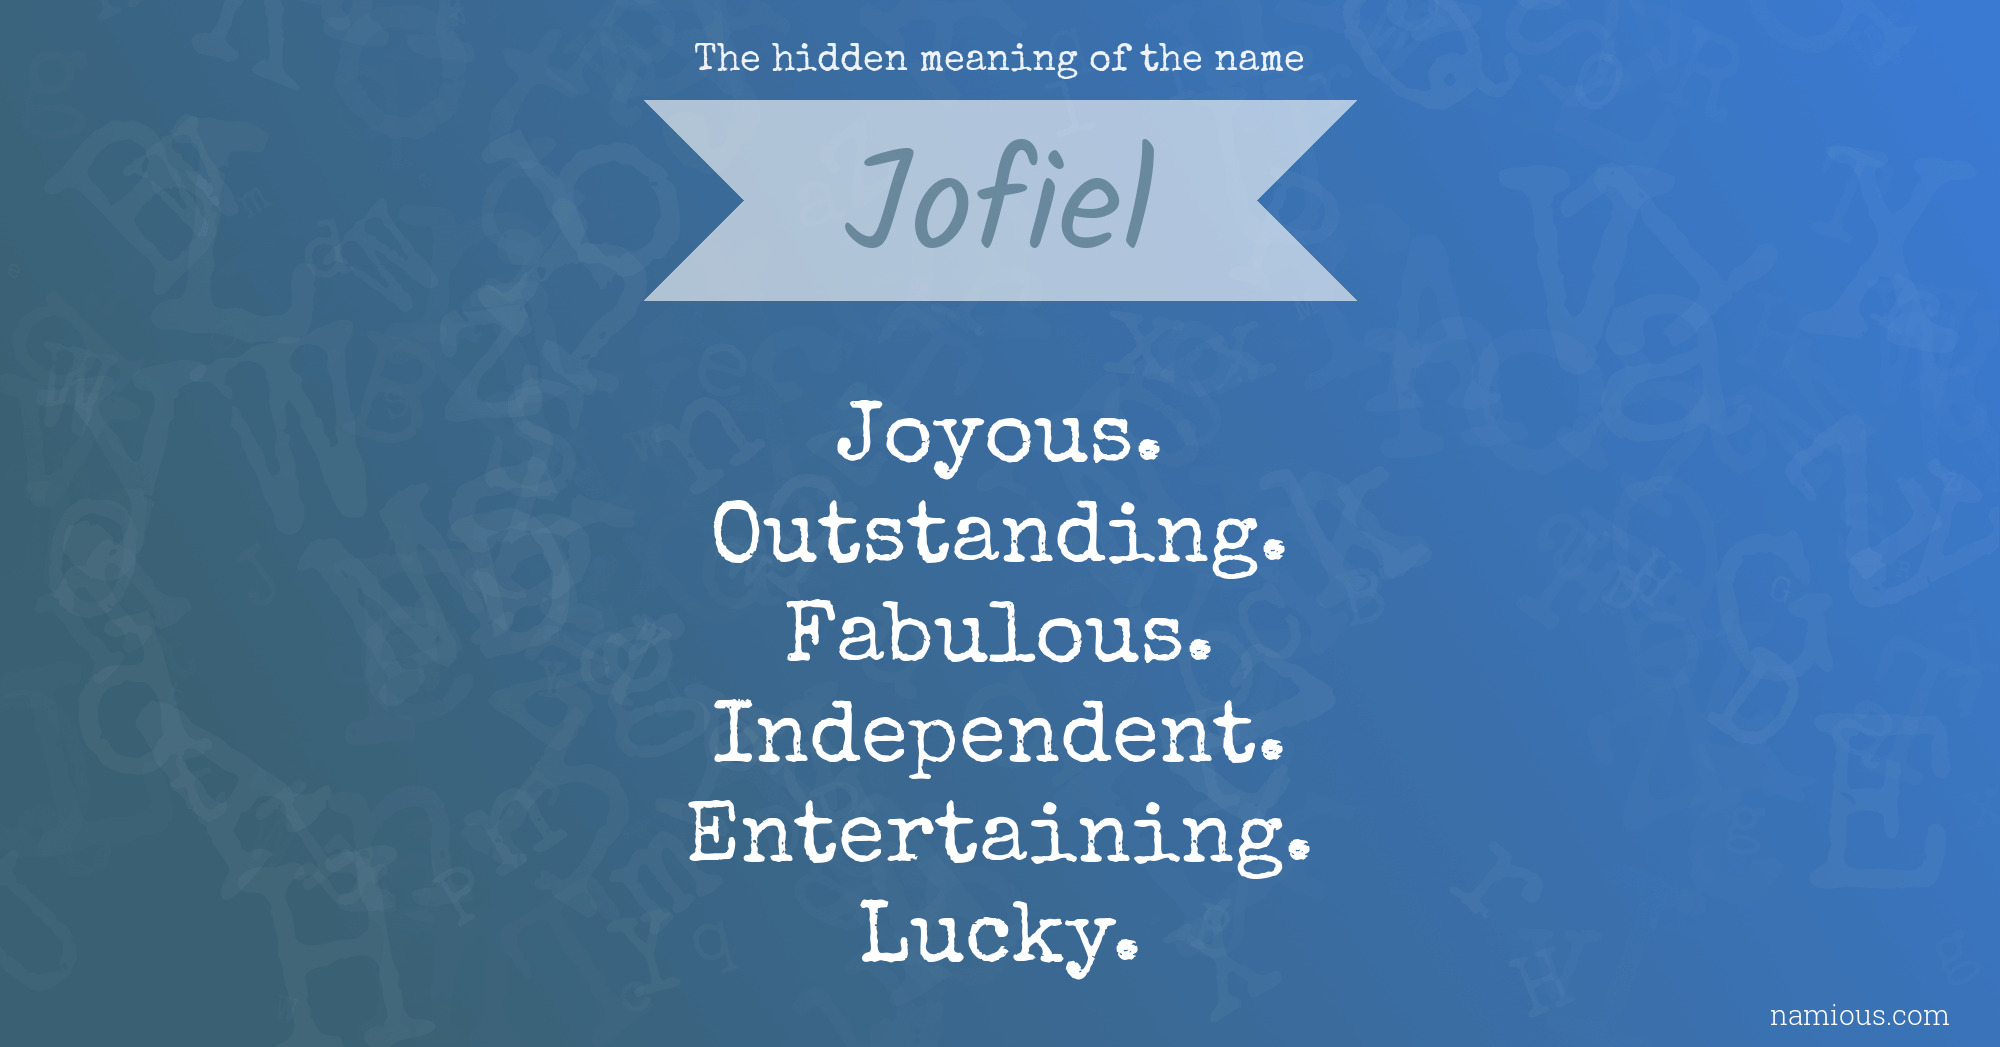 The hidden meaning of the name Jofiel